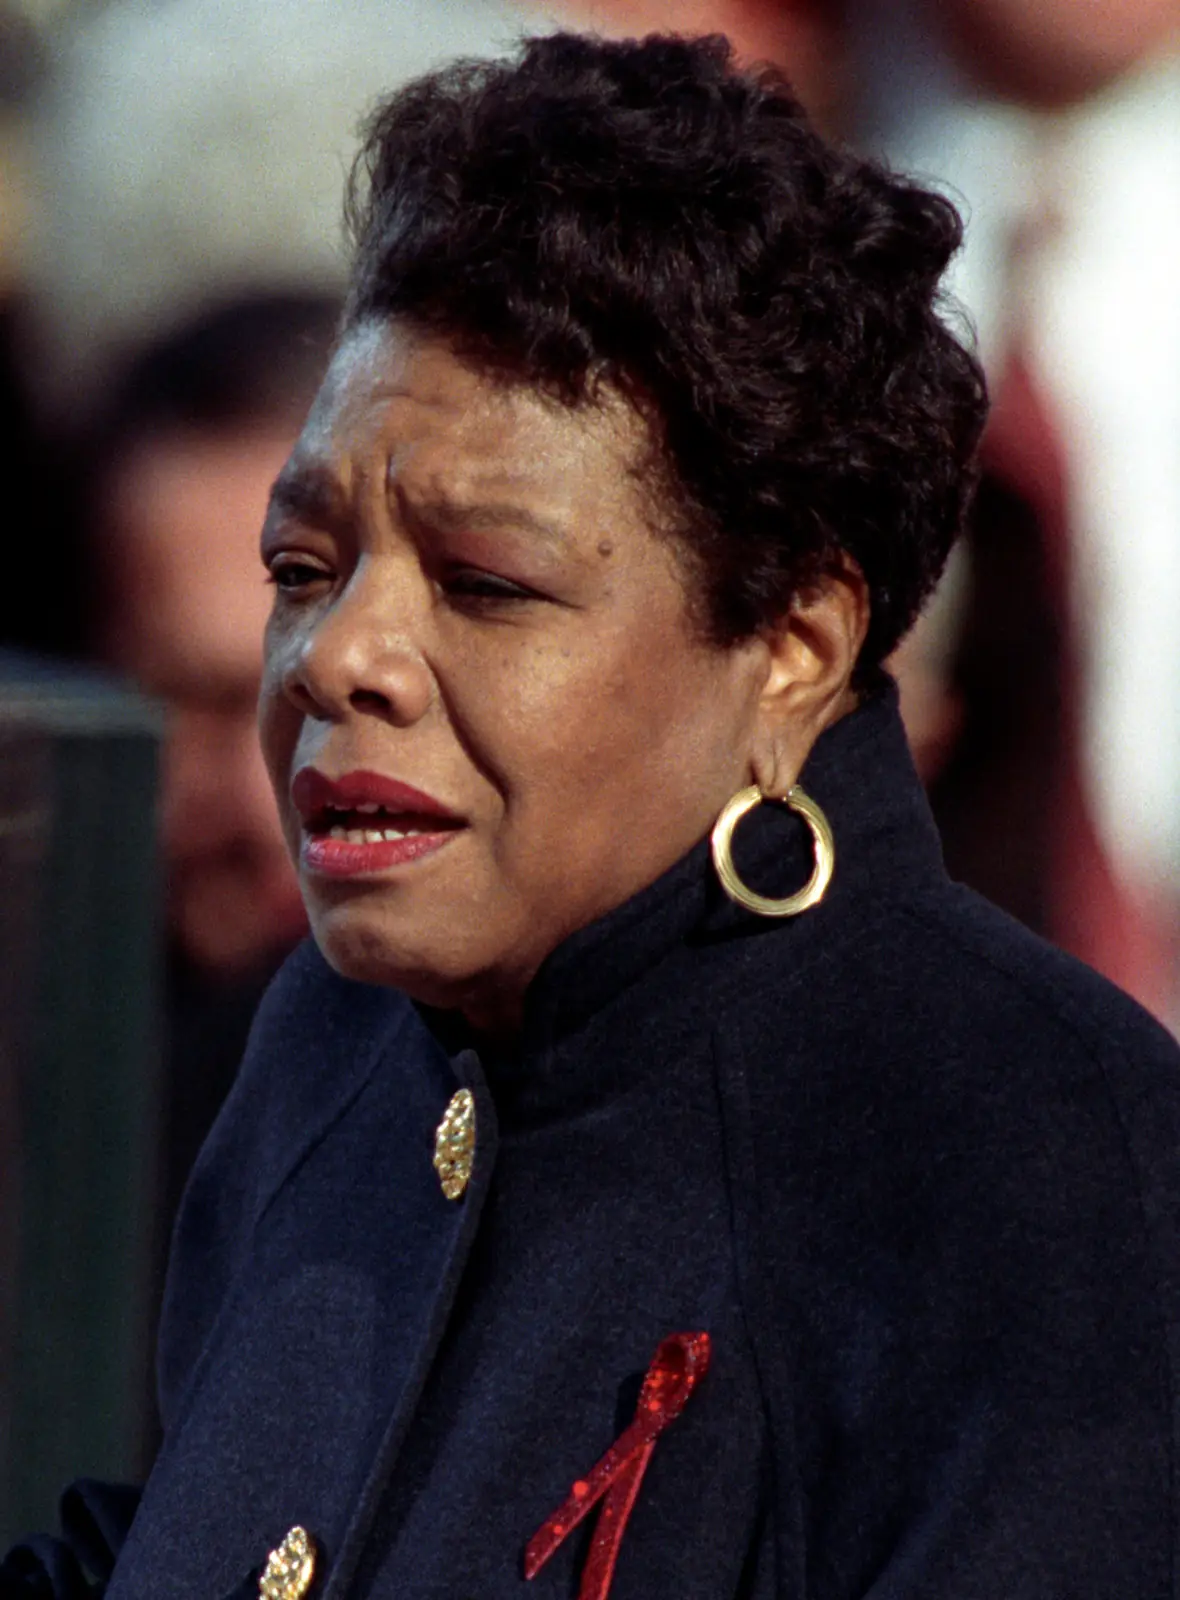 Angelou reciting her poem "On the Pulse of Morning" at U.S. president Bill Clinton's inauguration, January 20, 1993